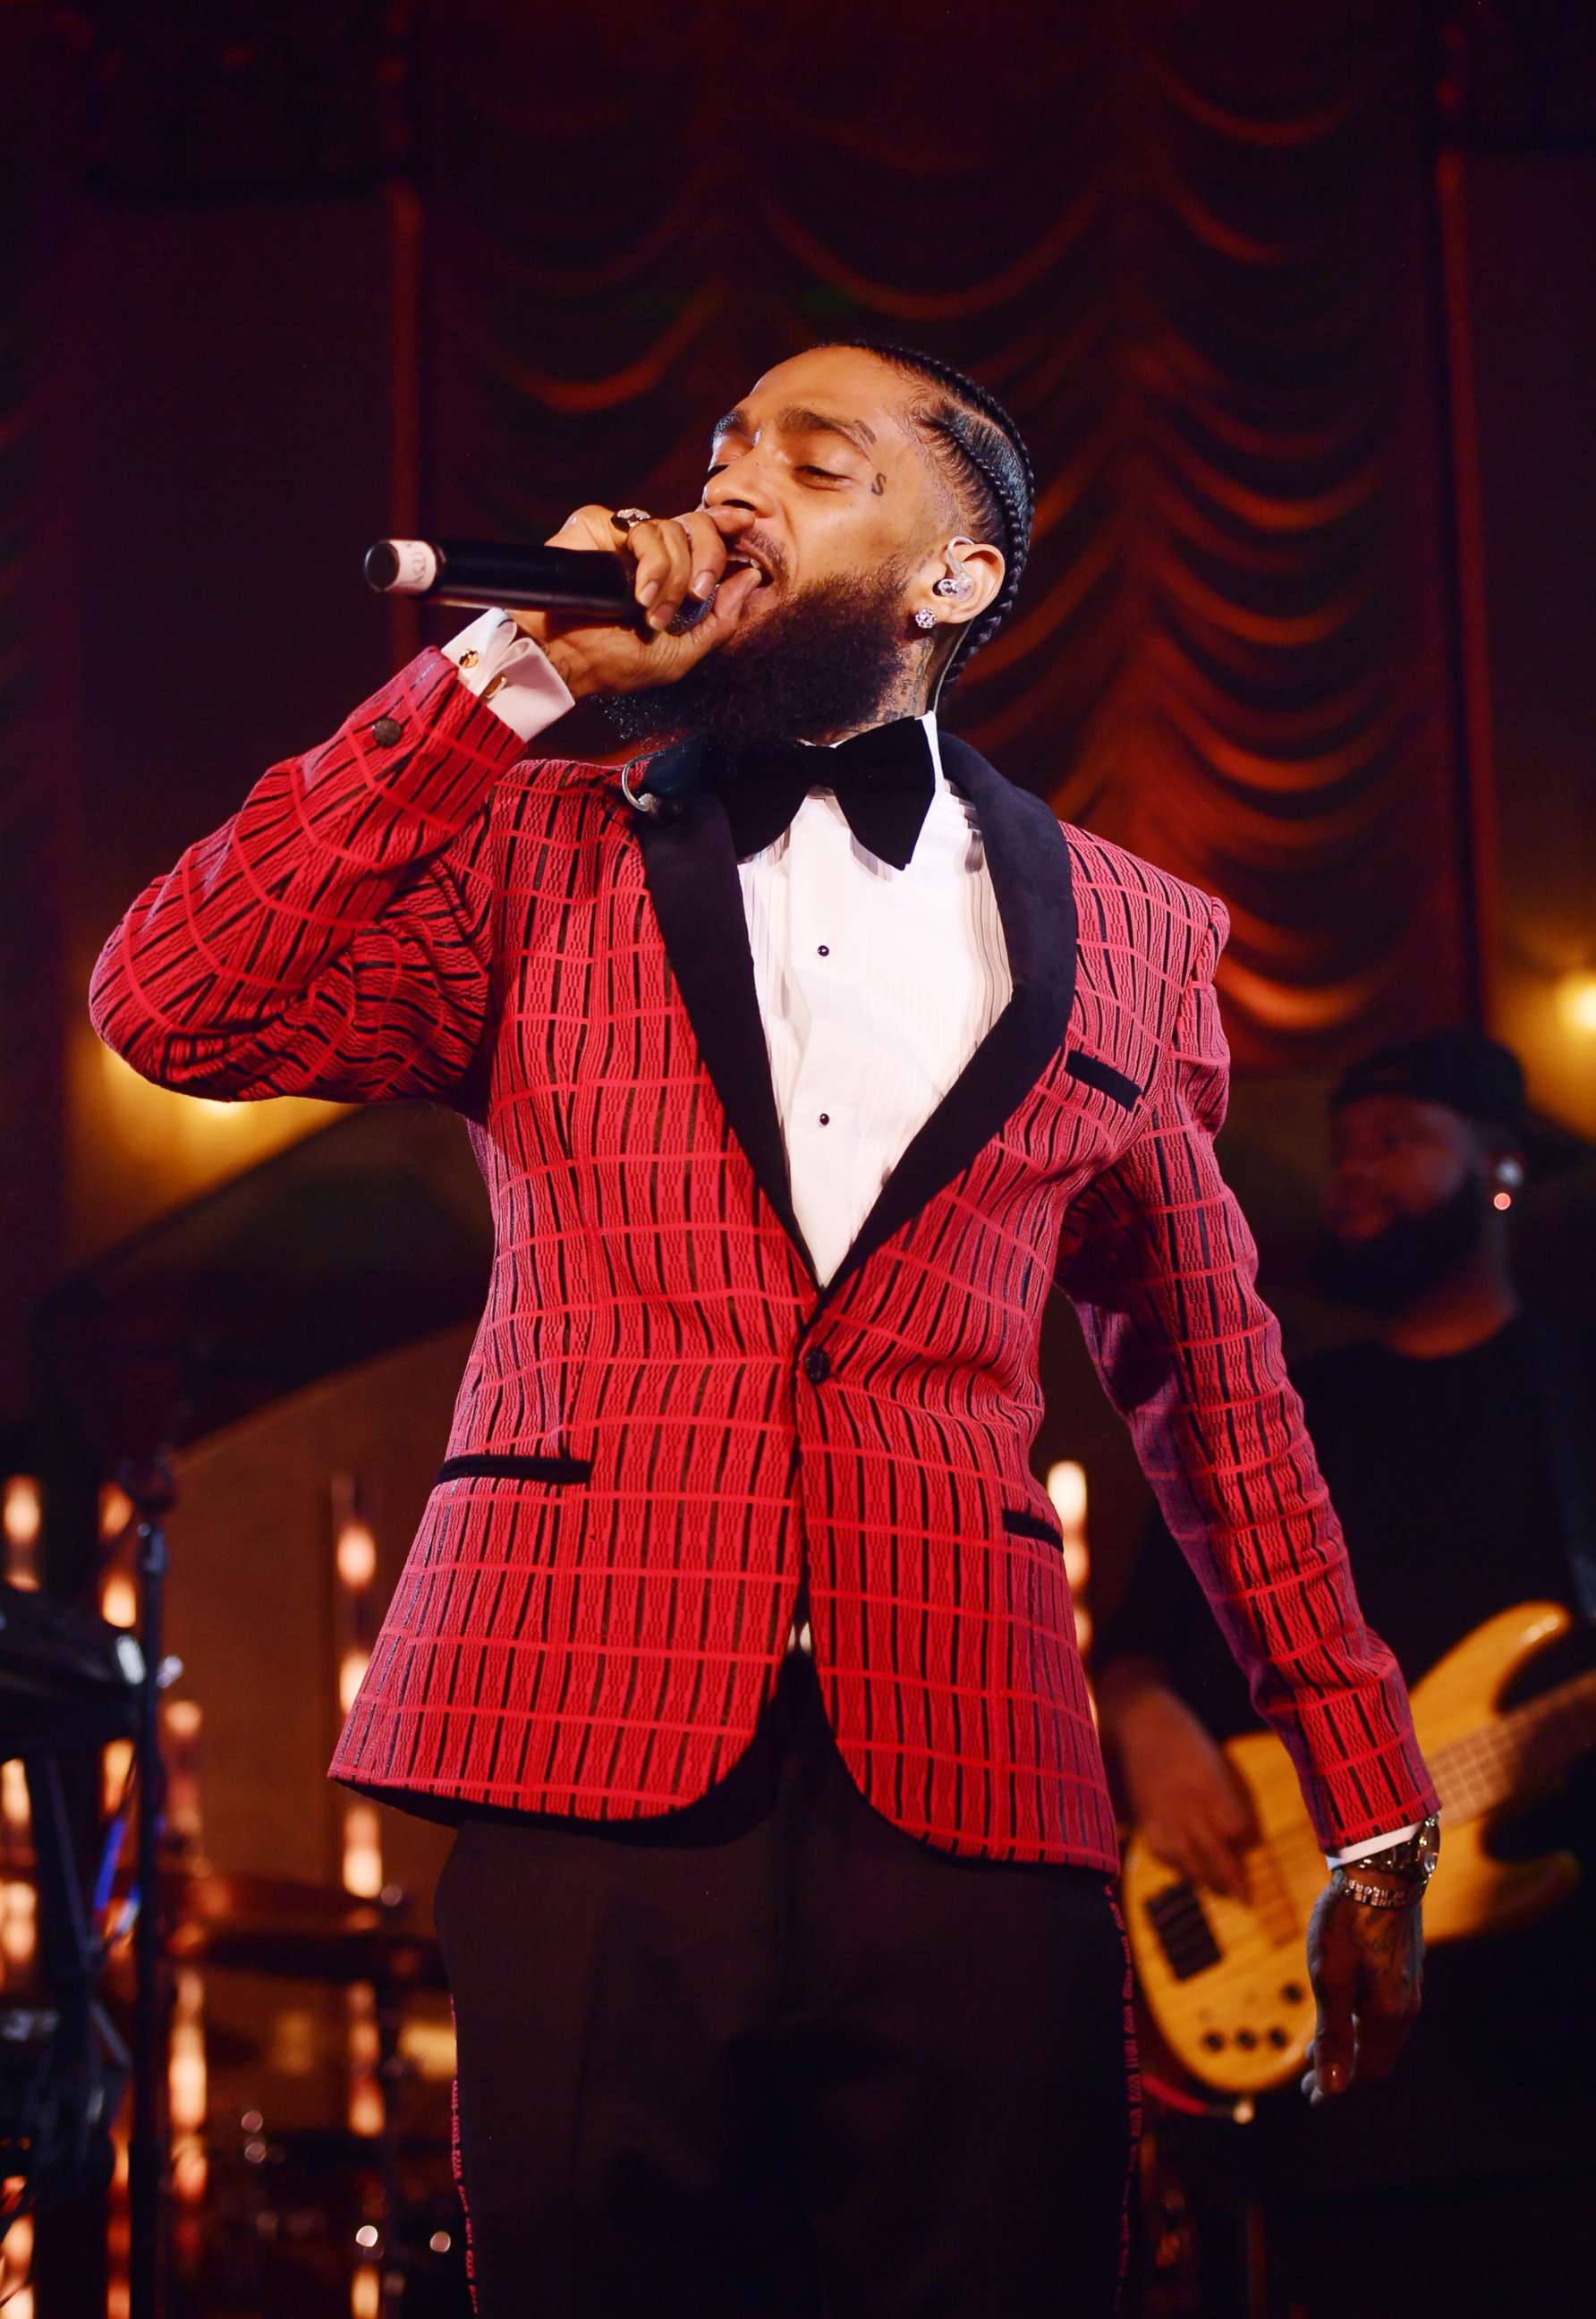 PHOTO: In this Feb. 7, 2019, file photo, Nipsey Hussle performs onstage at the Warner Music Pre-Grammy Party at the NoMad Hotel in Los Angeles.